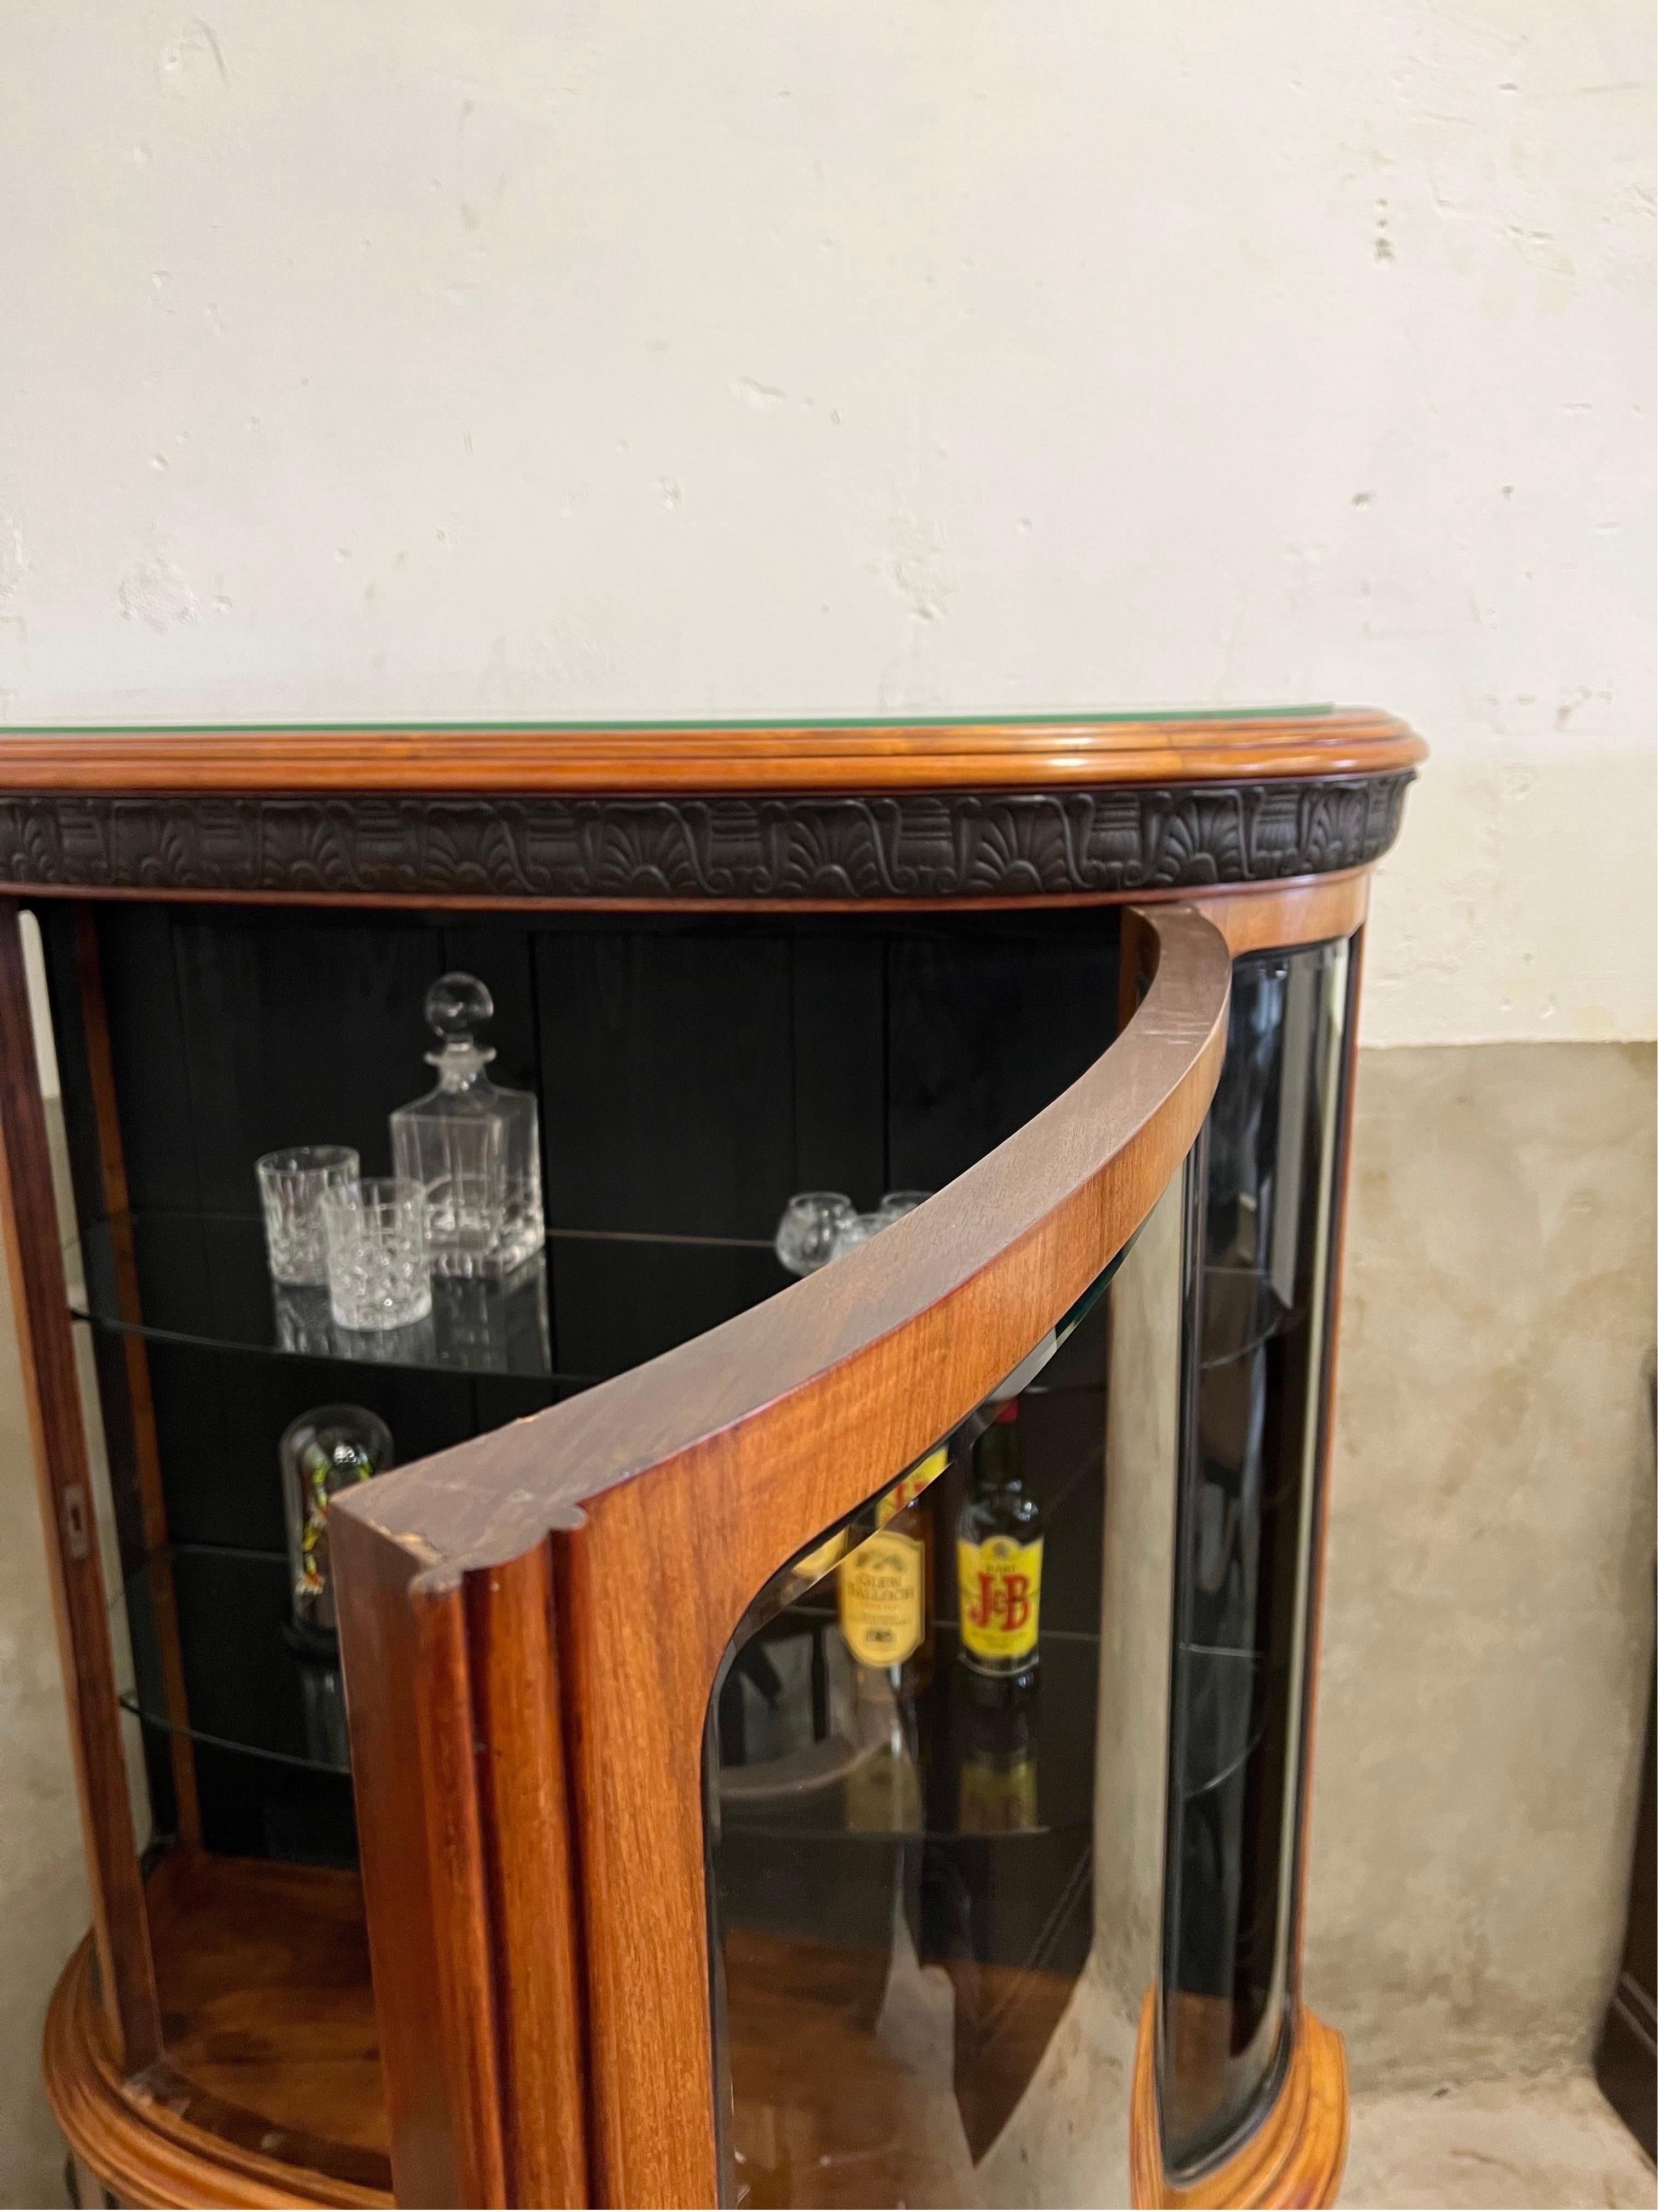 Early 20th Century Art Deco Beverage Cabinet, Curved Glass 3